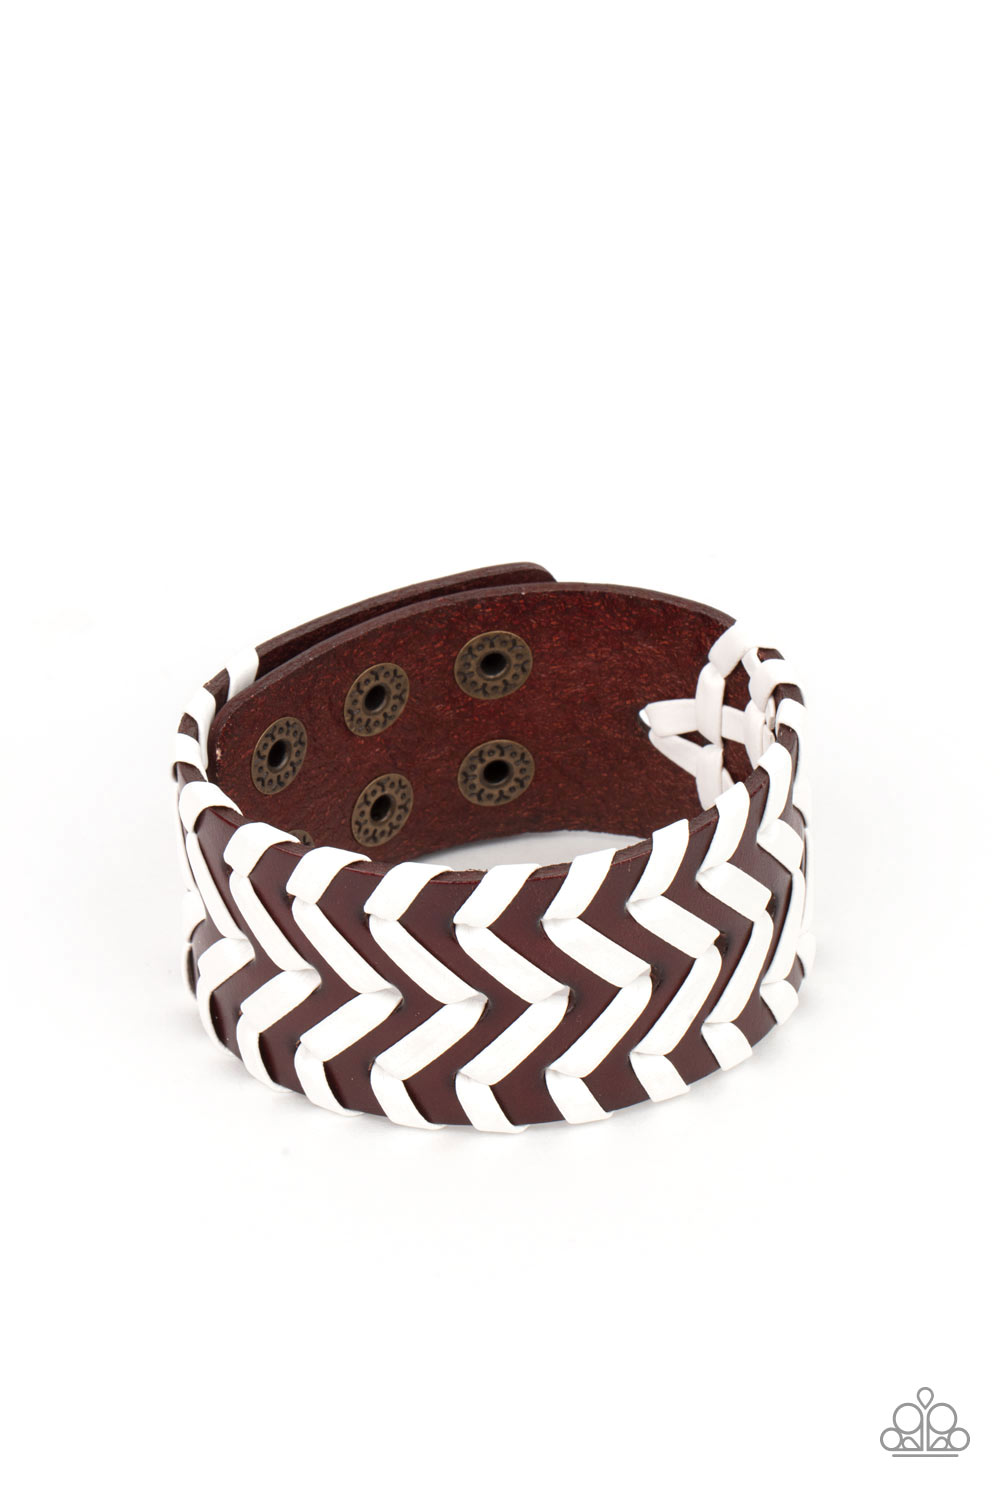 Biker Badlands Brown Urban Bracelet - Paparazzi Accessories.  White leathery cording is laced across the front of a thick brown leather band, creating an edgy chevron-like pattern. Features an adjustable snap closure.  ﻿All Paparazzi Accessories are lead free and nickel free!  Sold as one individual bracelet.